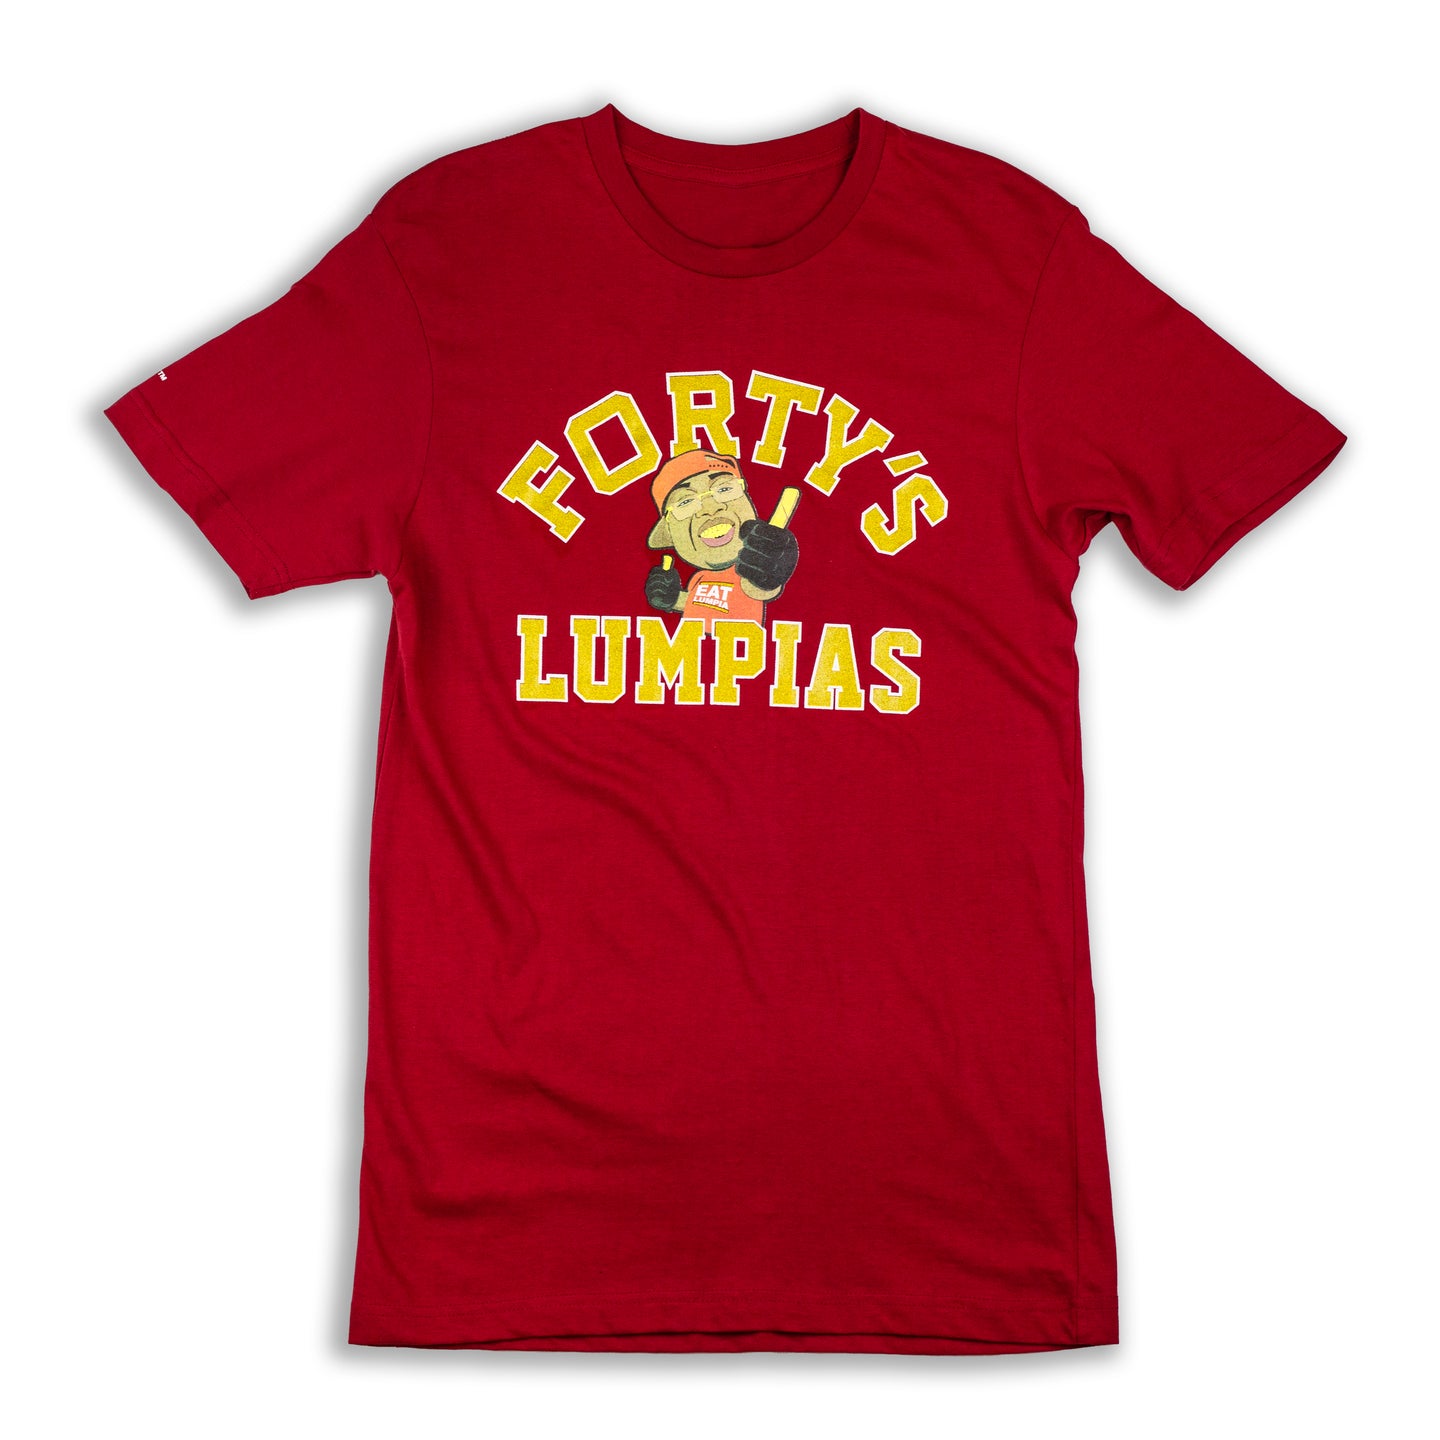 Forty's Lumpias T-Shirt